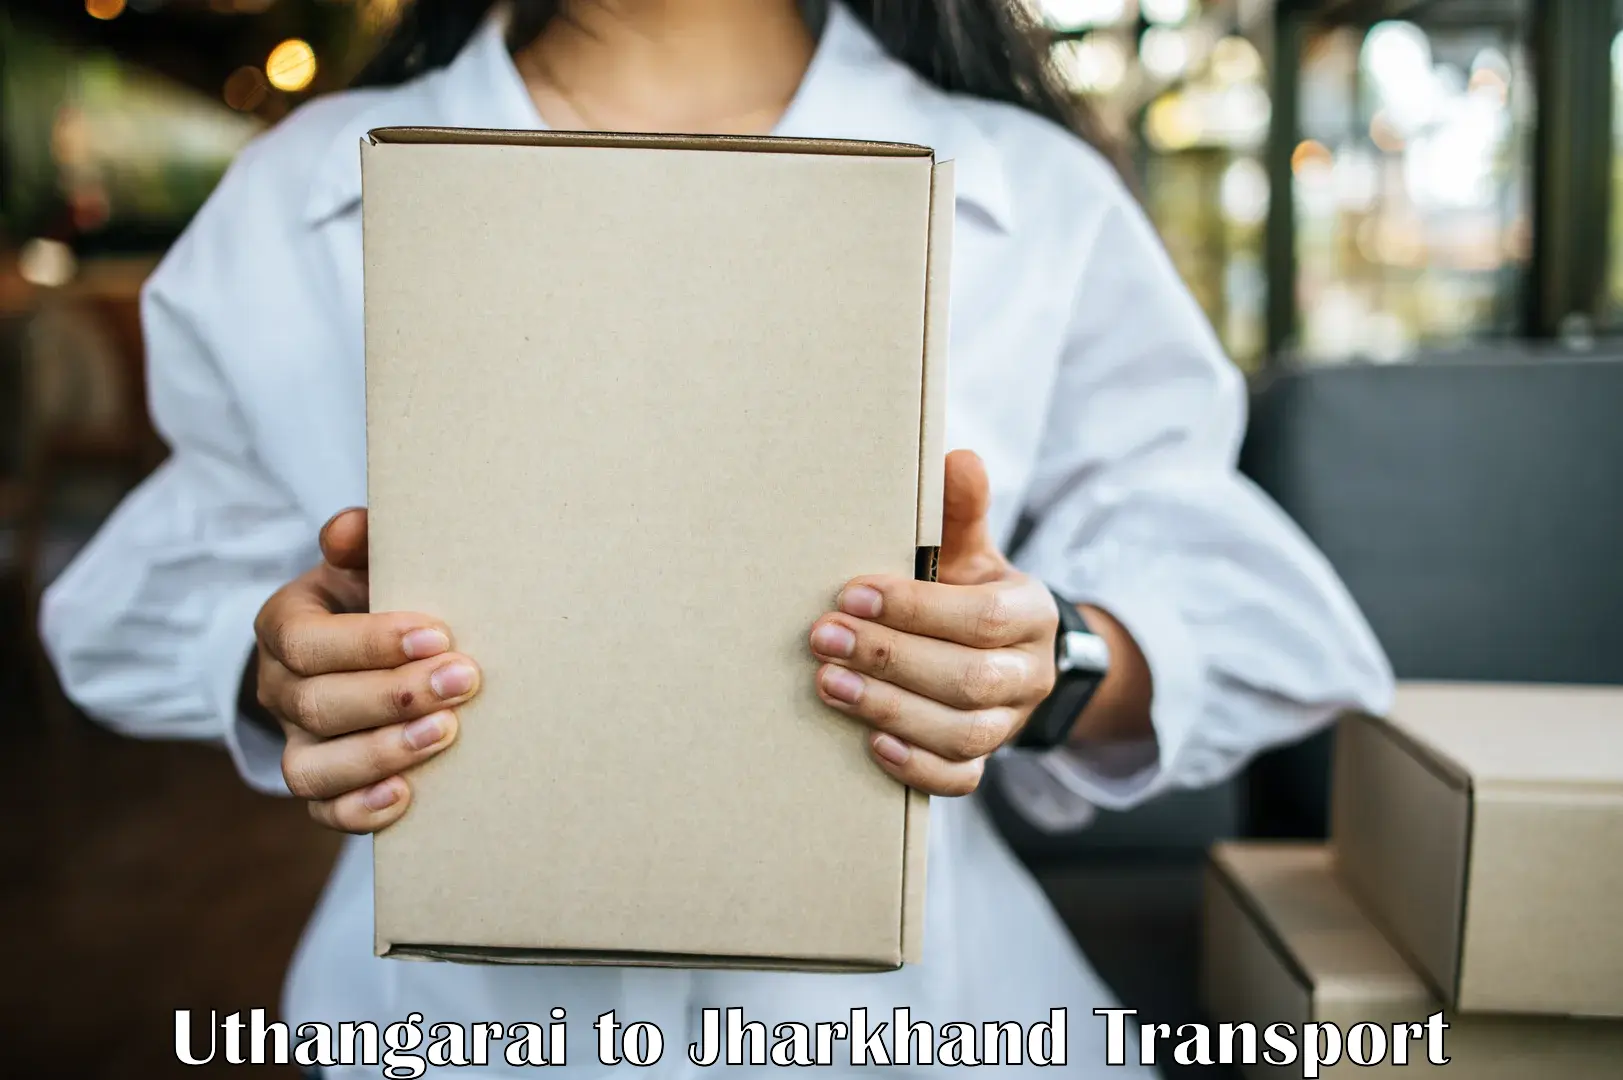 Commercial transport service Uthangarai to Jharkhand